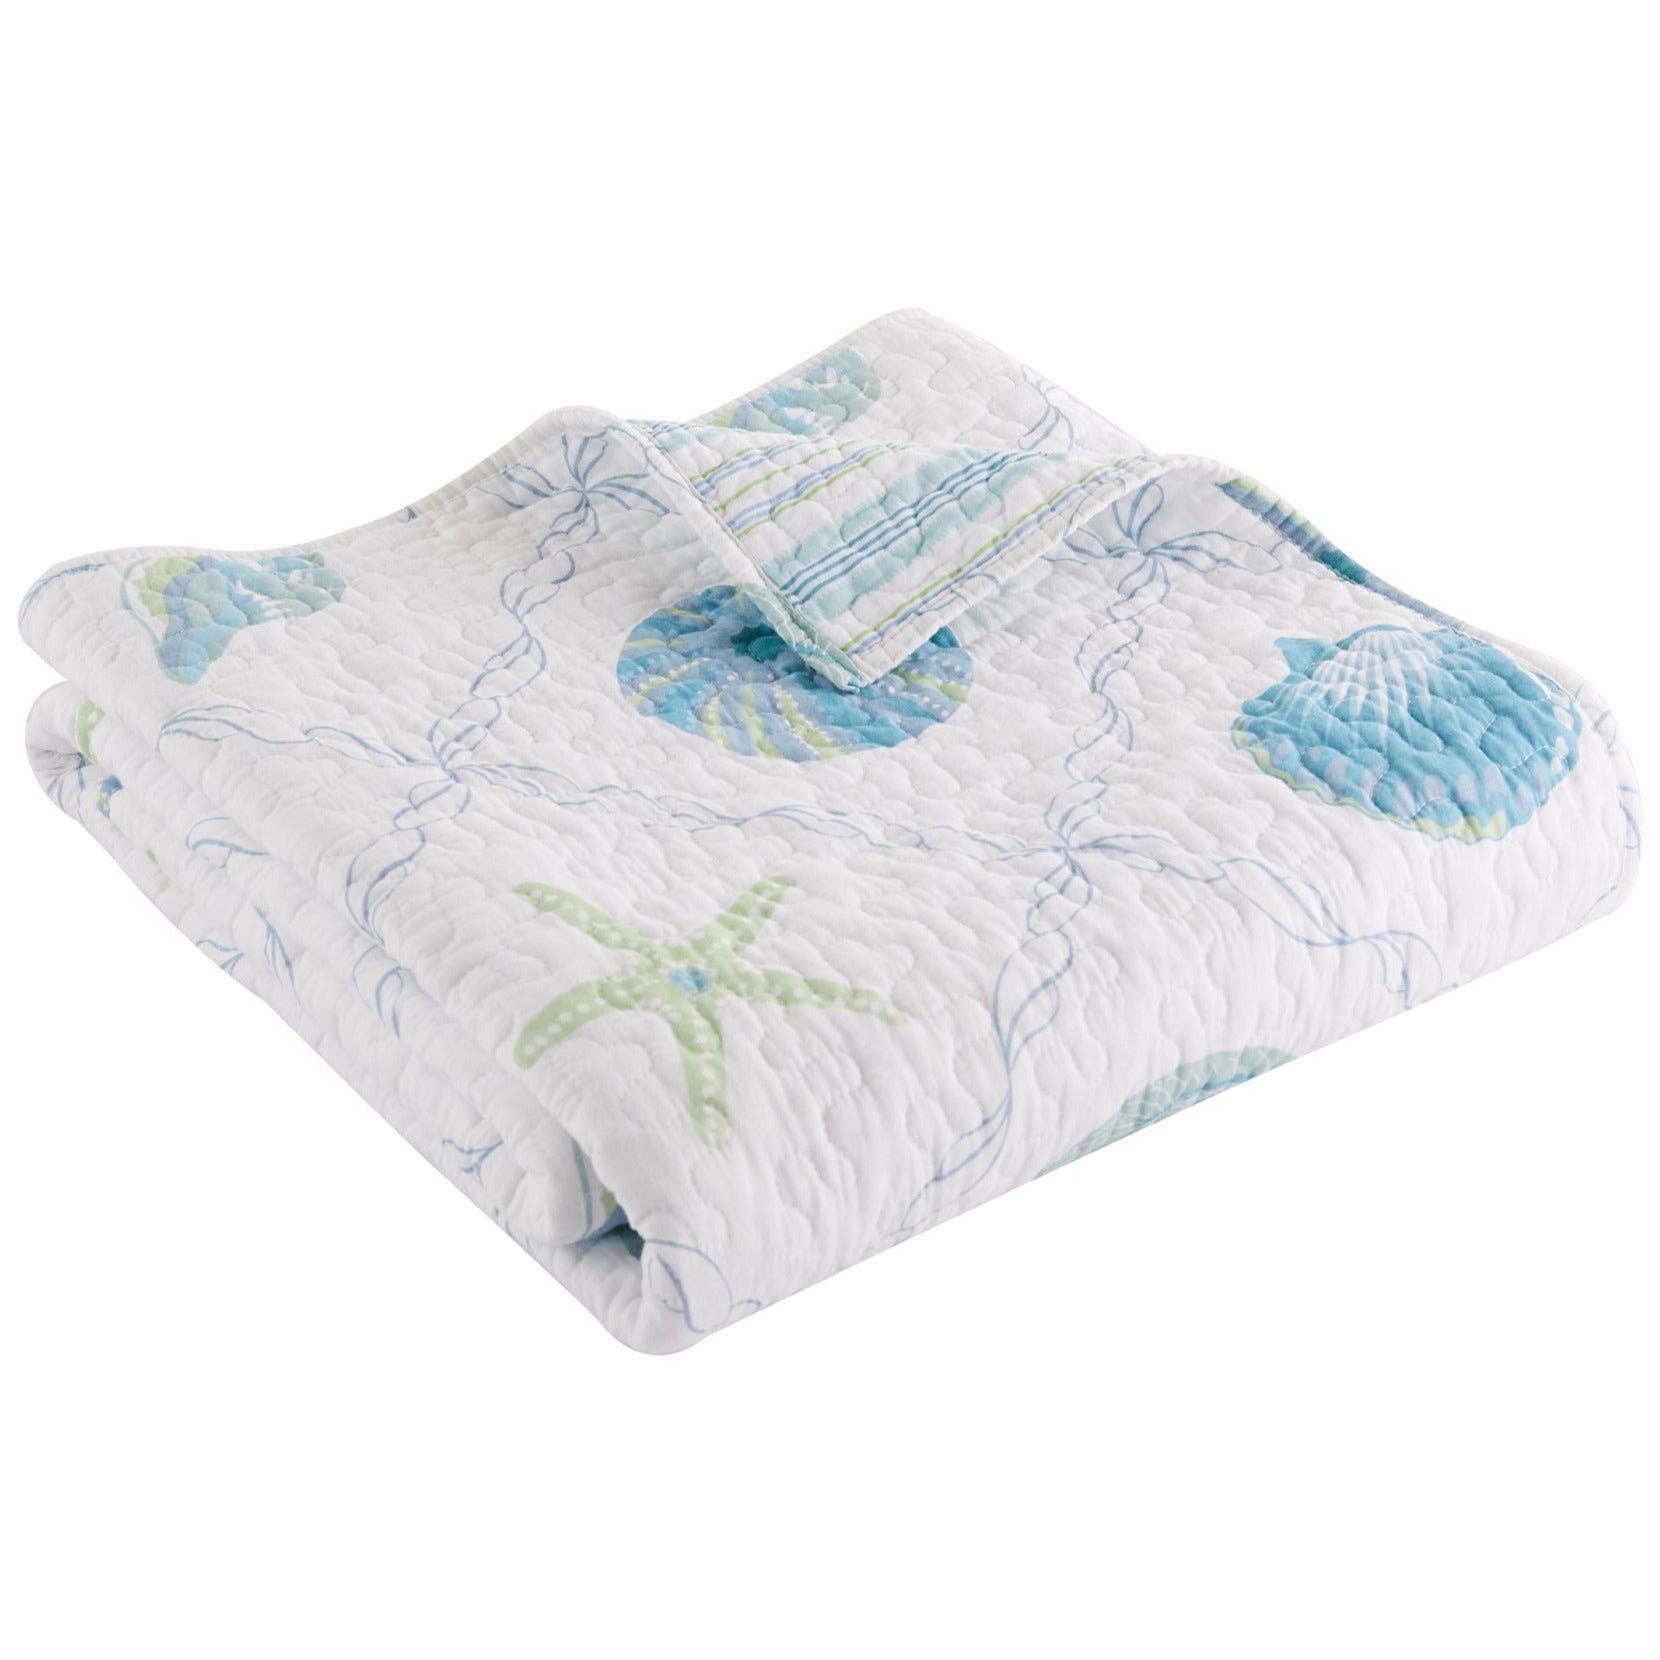 Marine Dream Seaglass Quilted Throw